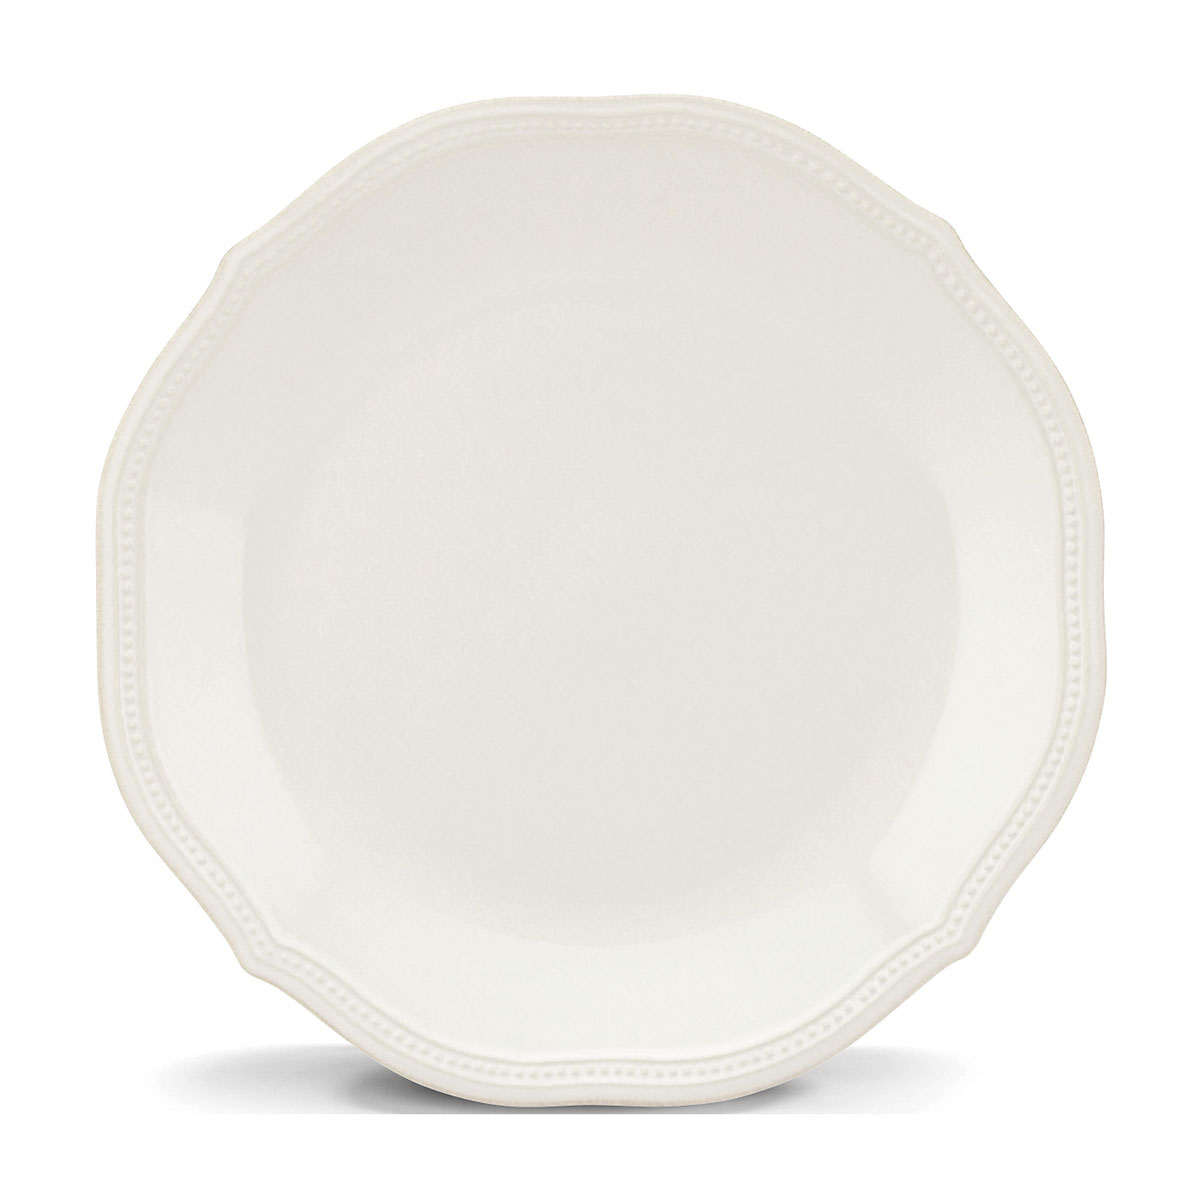 Lenox French Perle Bead White China Dinner Plate, Set of 4